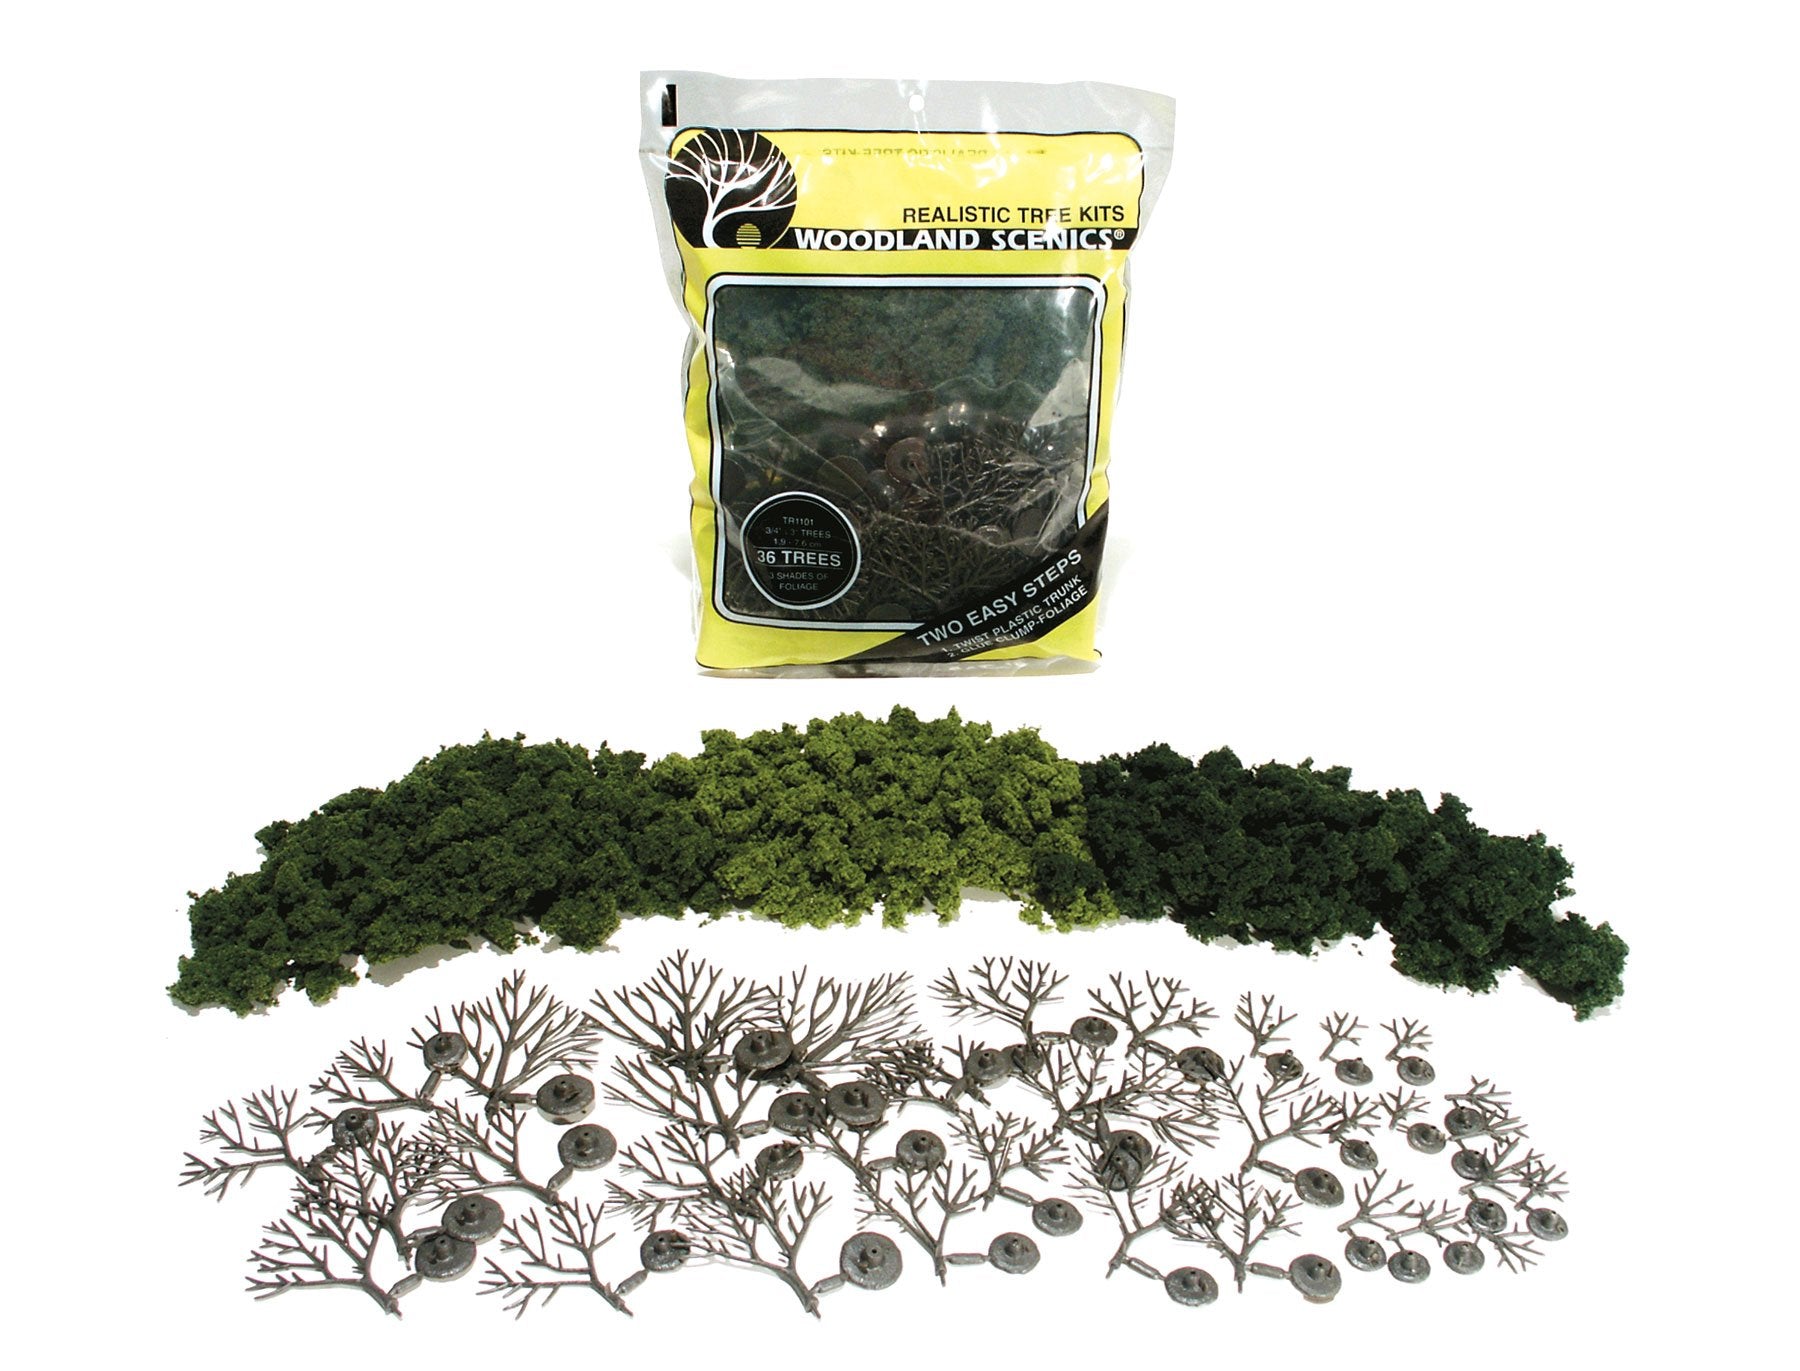 14 Deciduous Trees Realistic Tree kits - Hobby Supplies - The Hooded Goblin